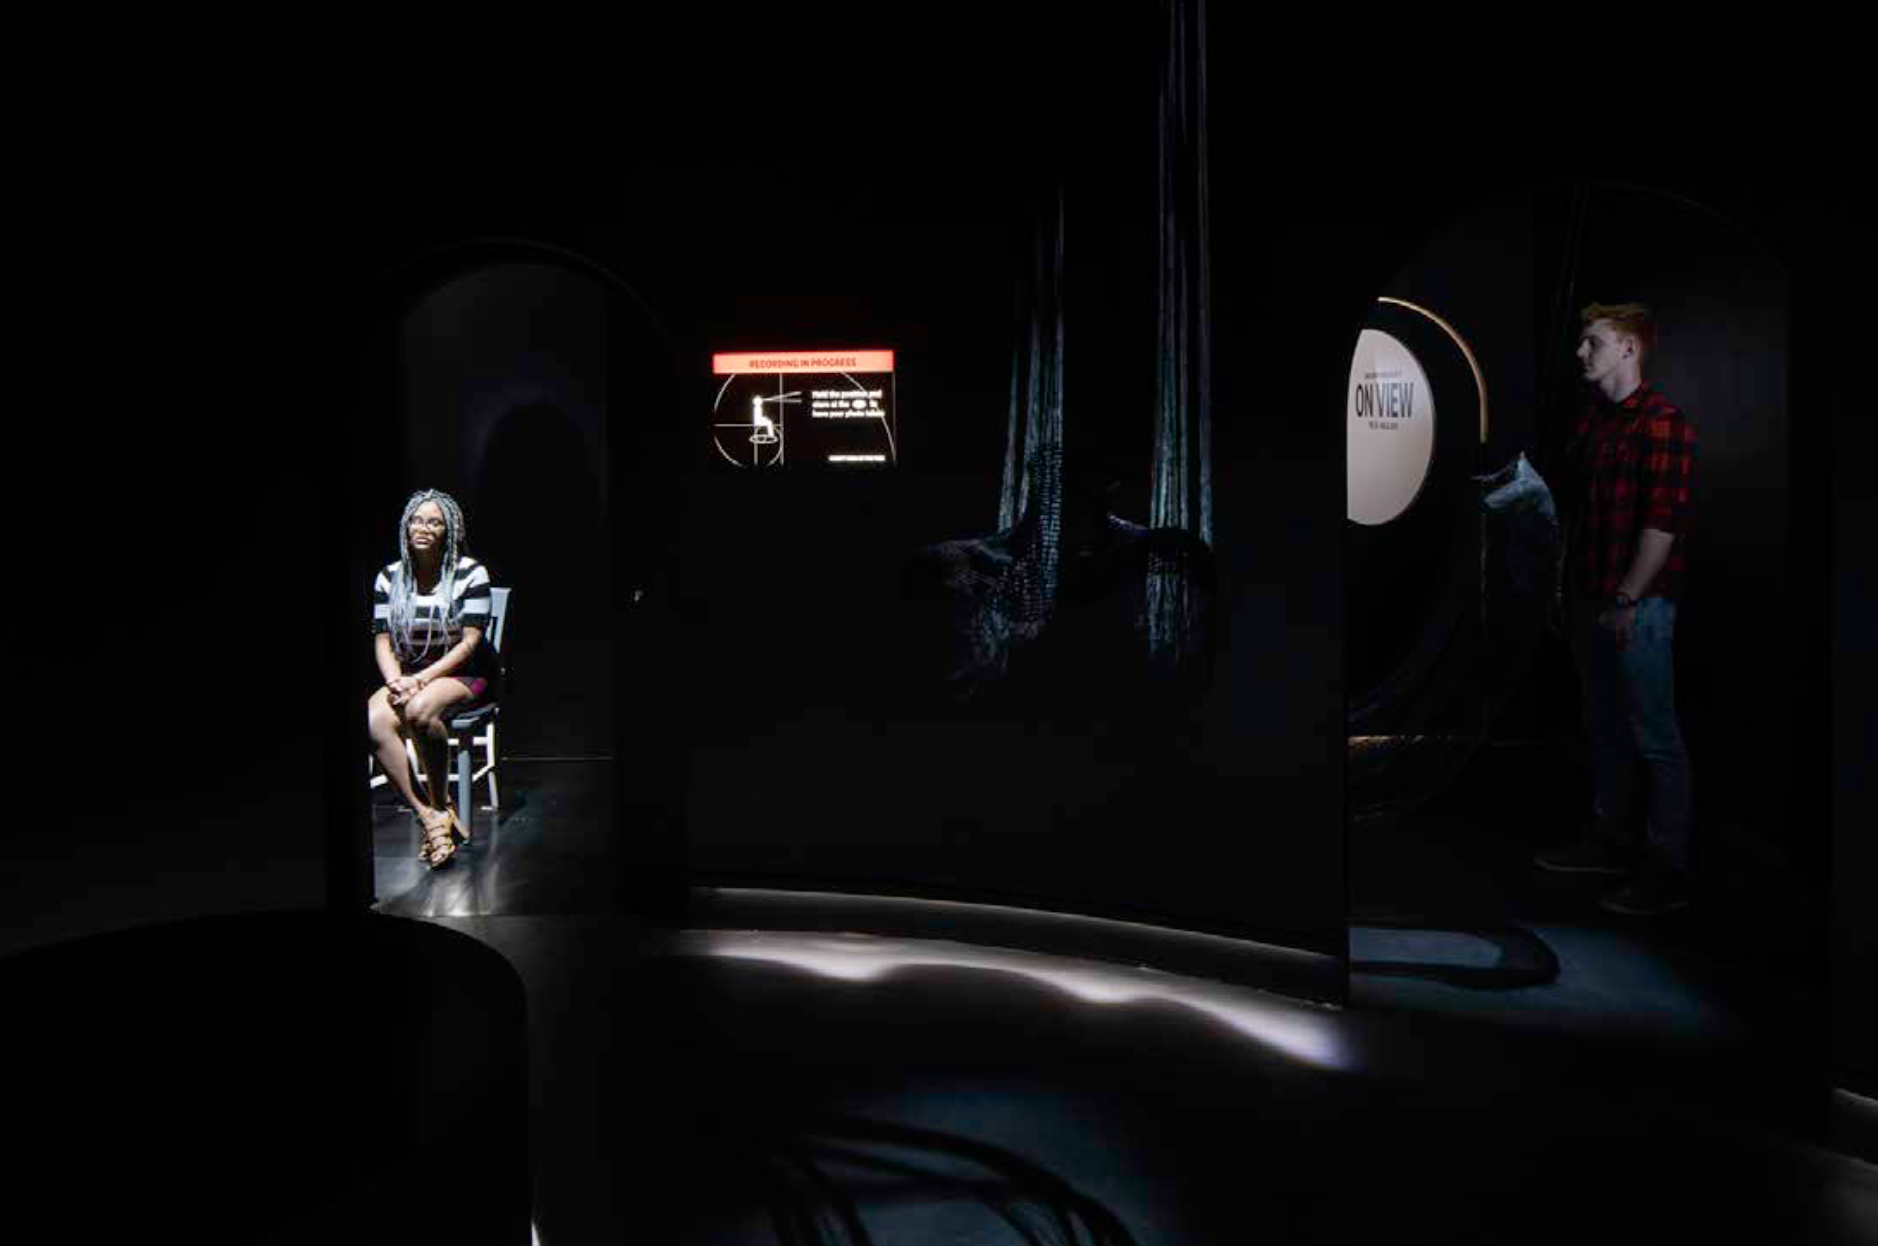 A photograph of a darkened space, on the left-hand side you can see a spotlit woman sitting in a chair, behind her there is a screen with text that reads "recording in progress". A man is visible on the far right of the image